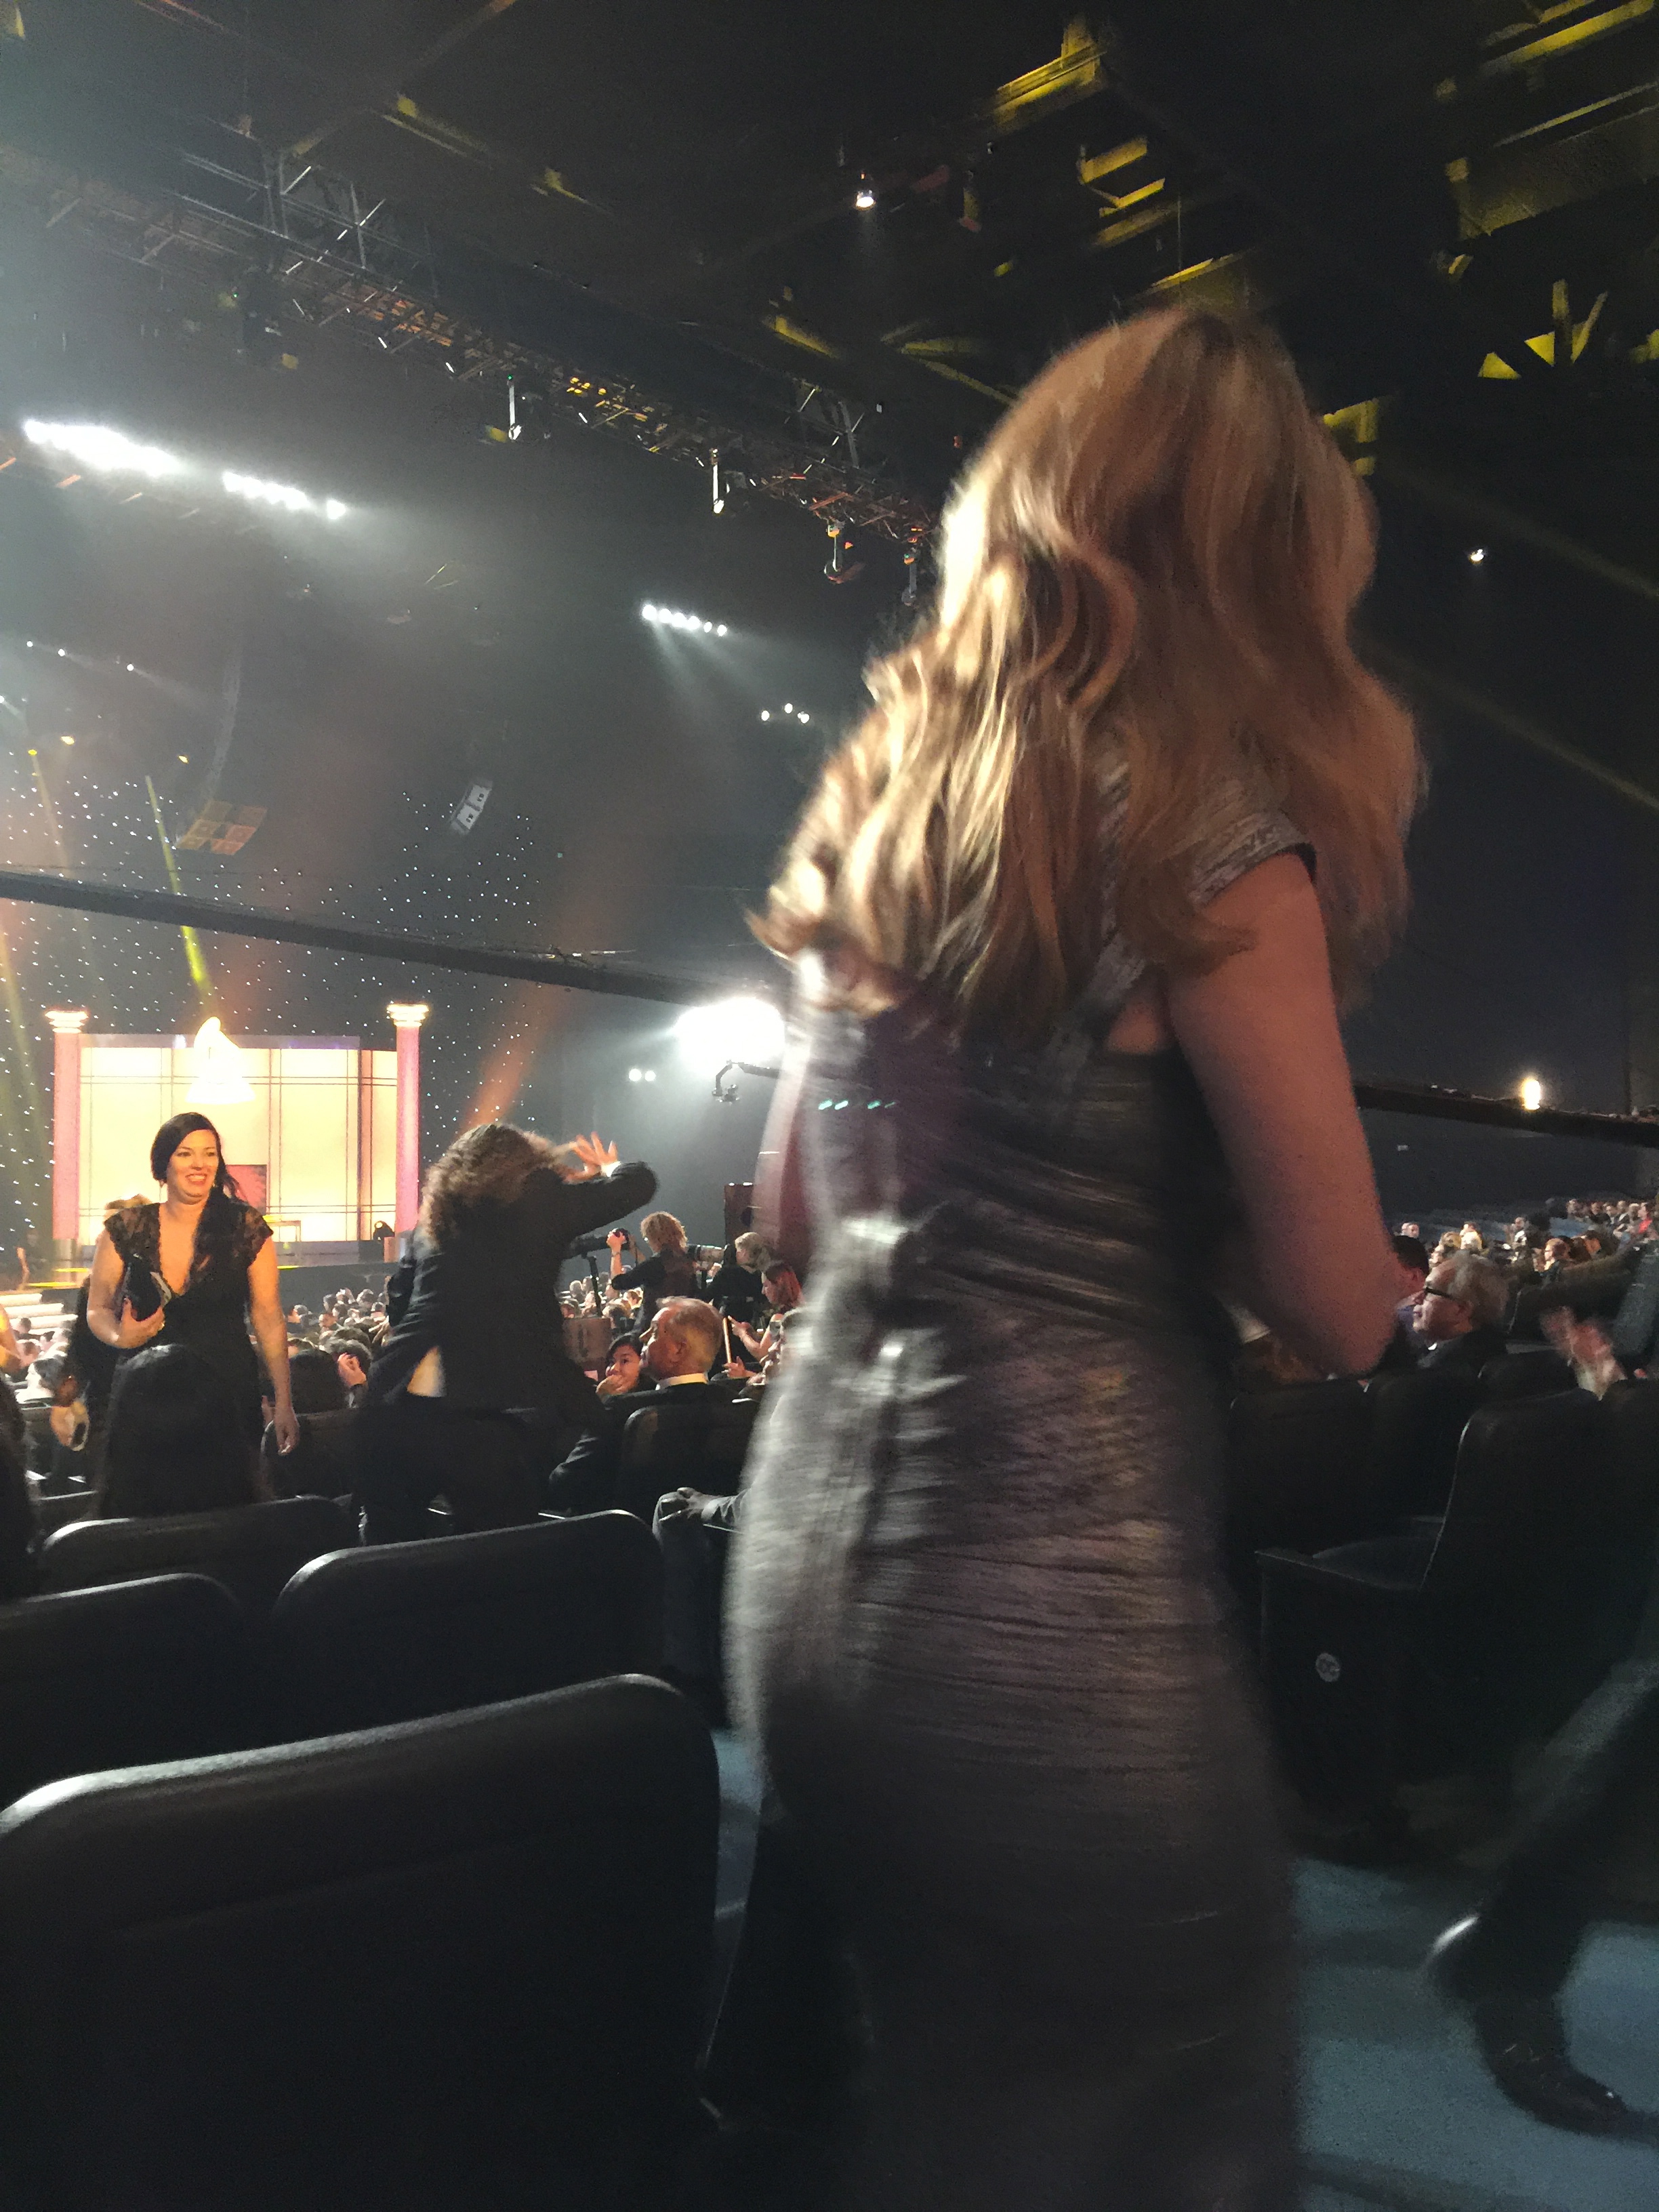 Photo of Jane Seymour in foreground as Weird Al Yankovich runs down the aisle to the stage in the background